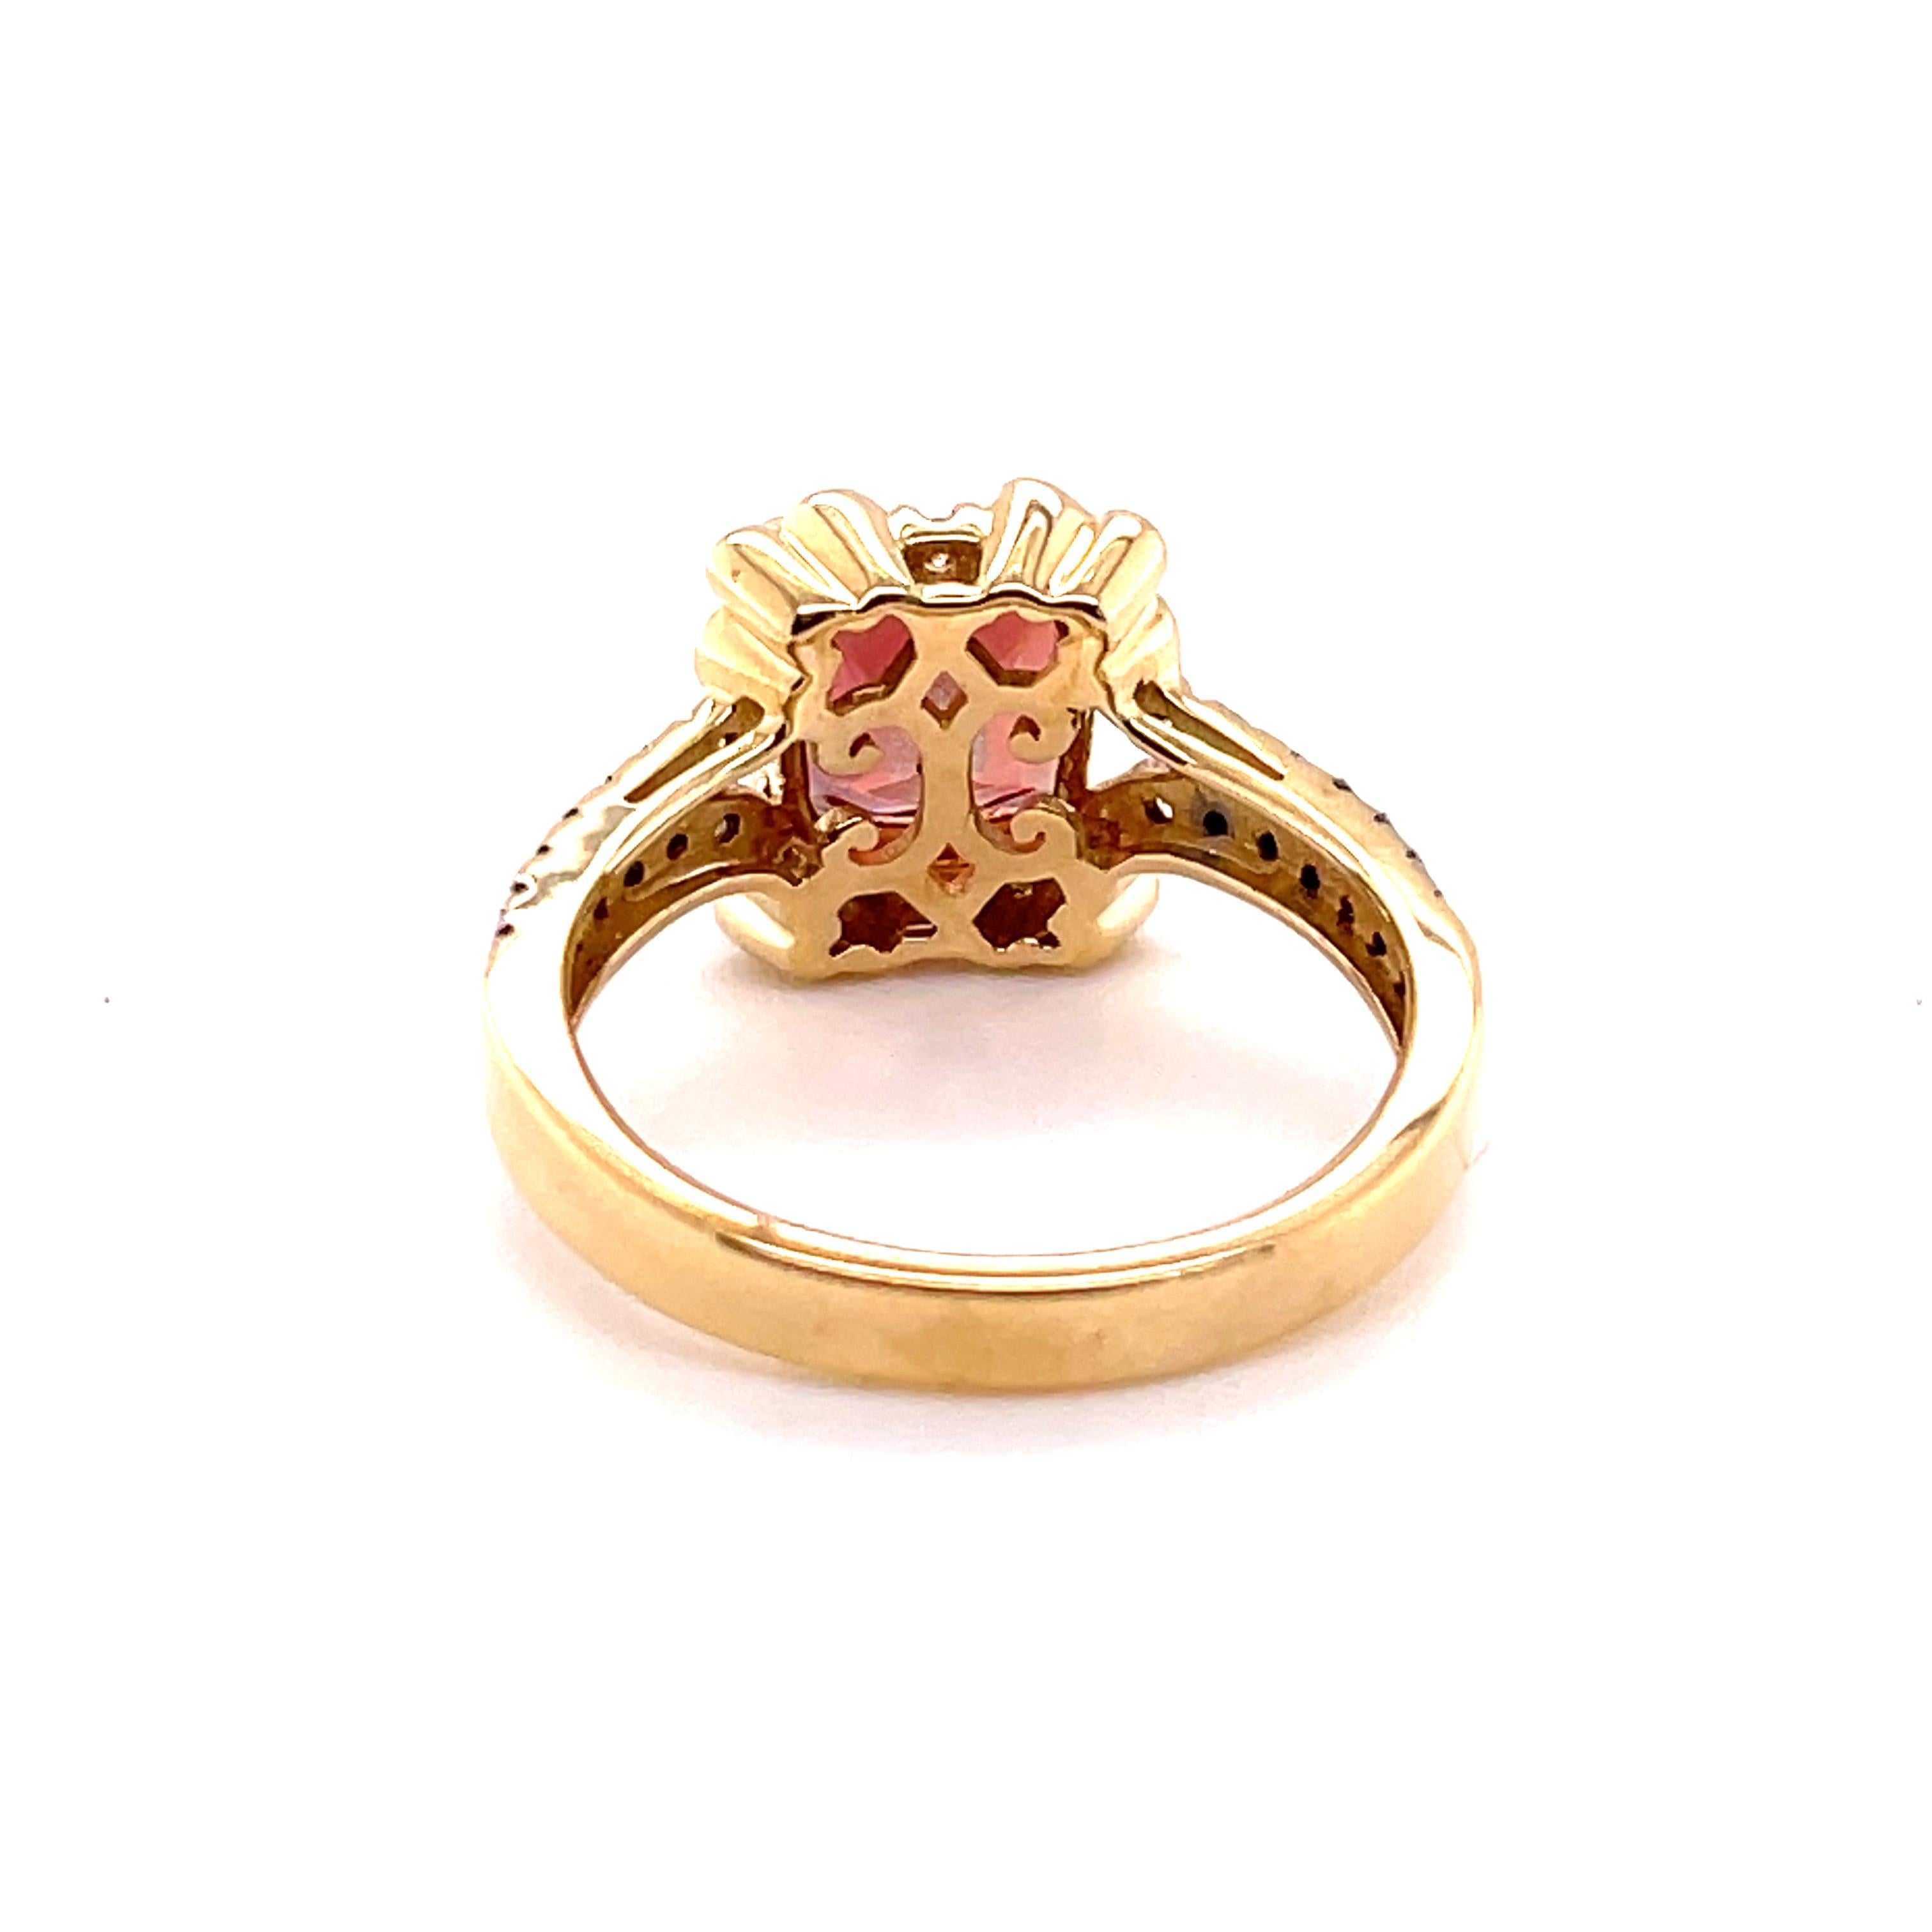 This rich orange square-cut Oregon Sunstone is set in polished 14k yellow gold, providing a classic look. The ring has four prongs and next to them on each corner of the basket is a leaf design, each containing three white Diamonds. The shank has a